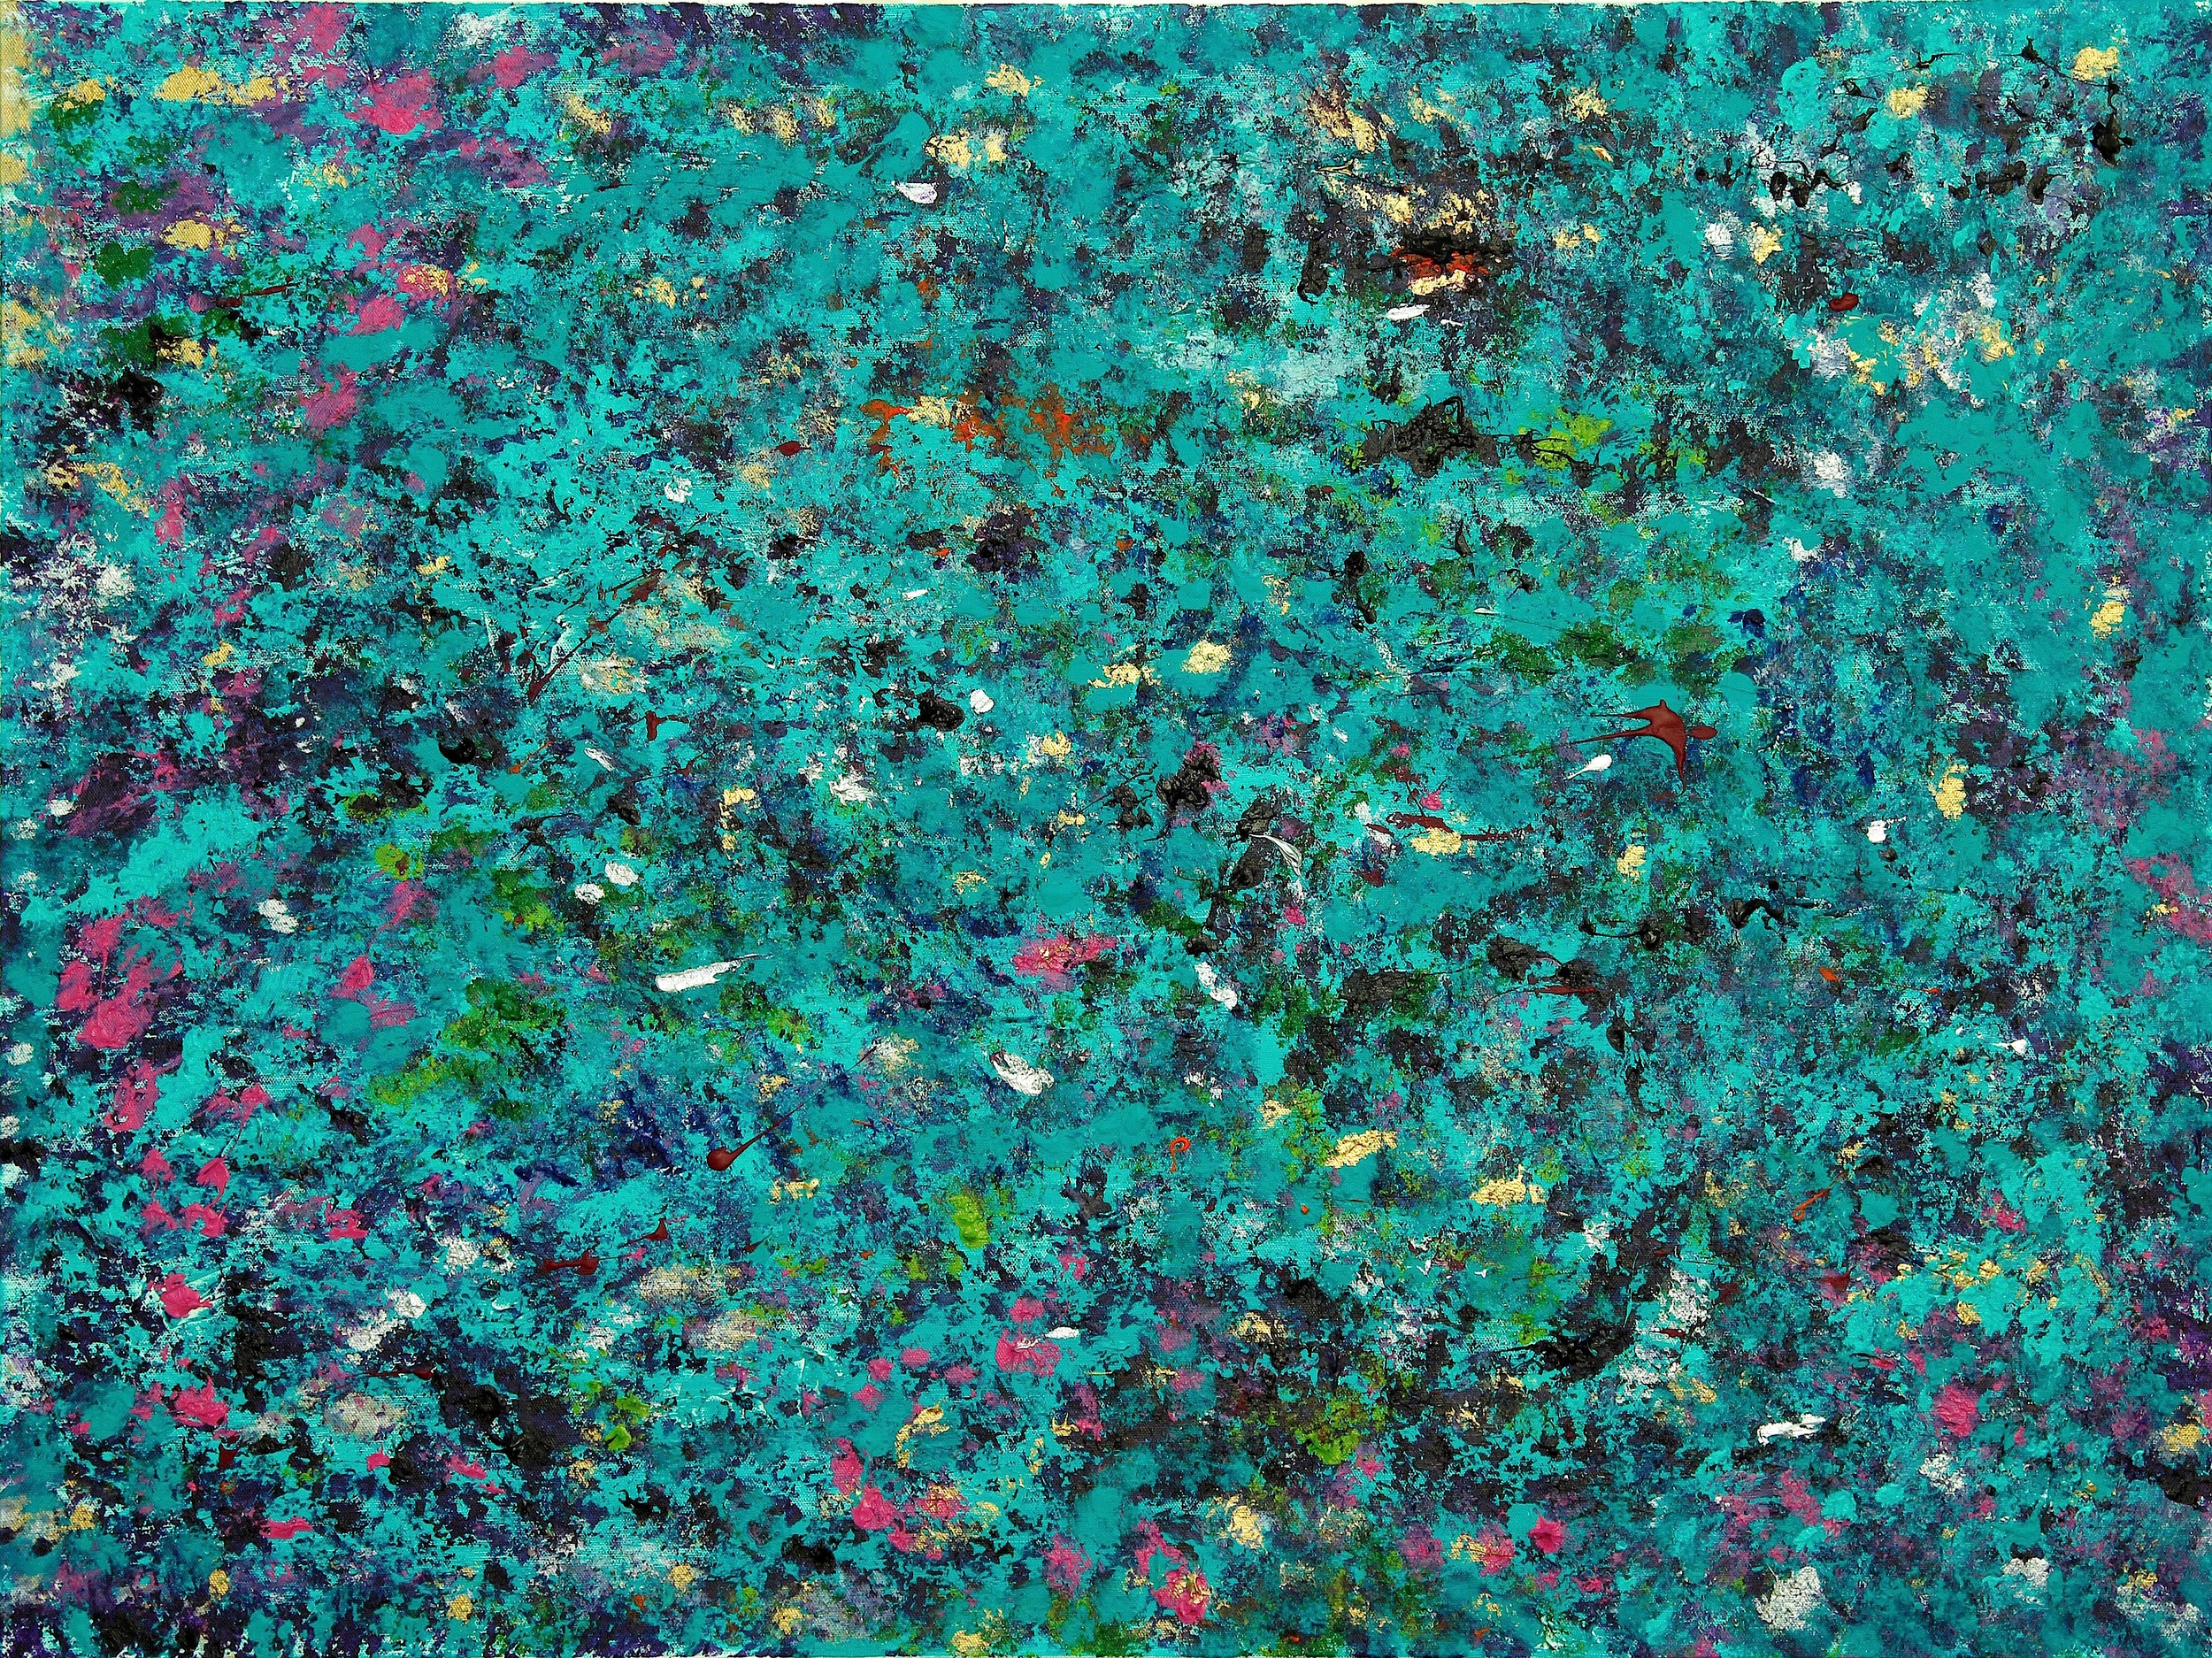   Turquoise Coral    Acrylic on Canvas    30 x 40 x 1.5 in.  